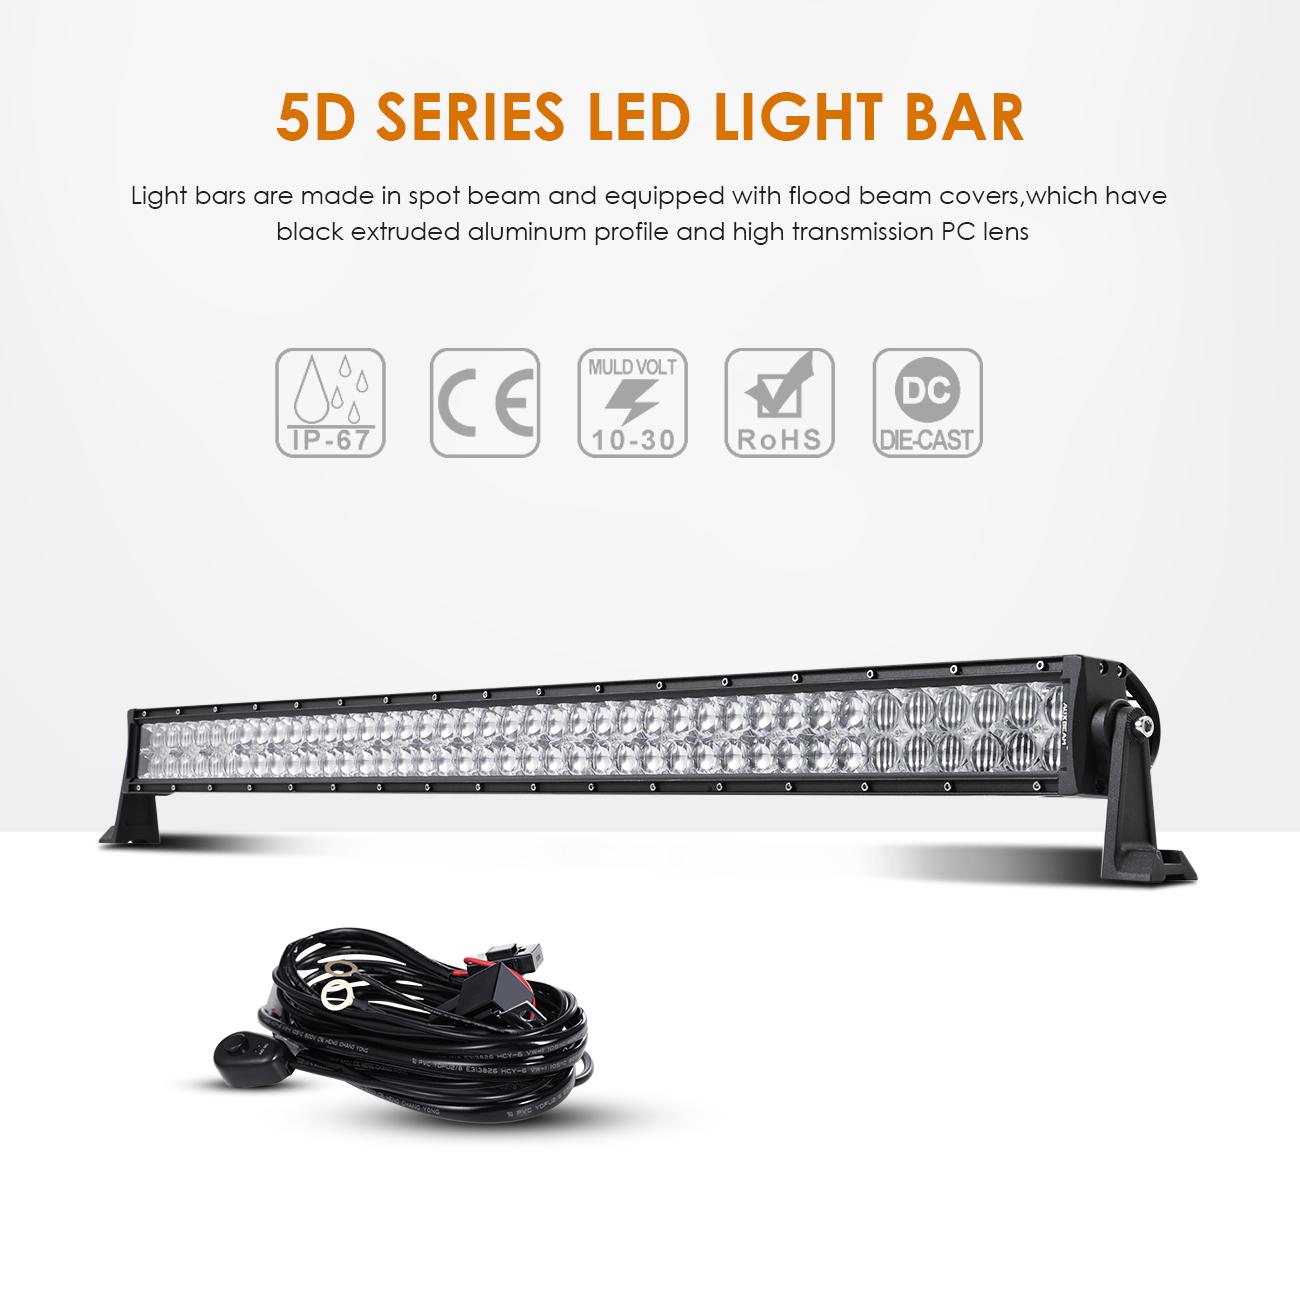 22" Curved CREE LED Light Bar 5D Lens 12000LM IP67 Rating waterproof